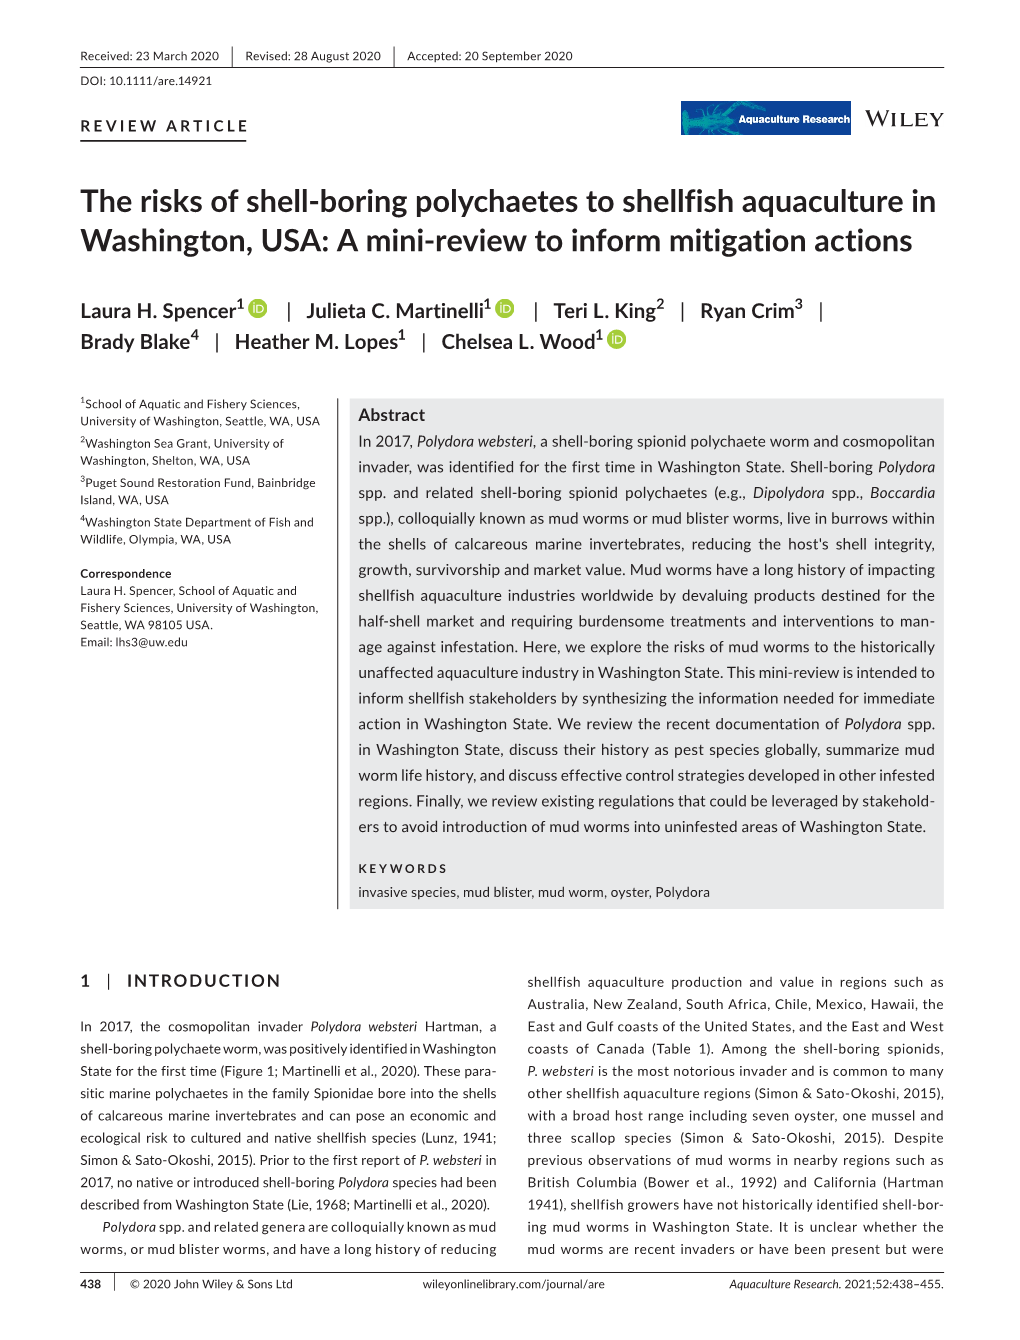 Boring Polychaetes to Shellfish Aquaculture in Washington, USA: a Mini-Review to Inform Mitigation Actions